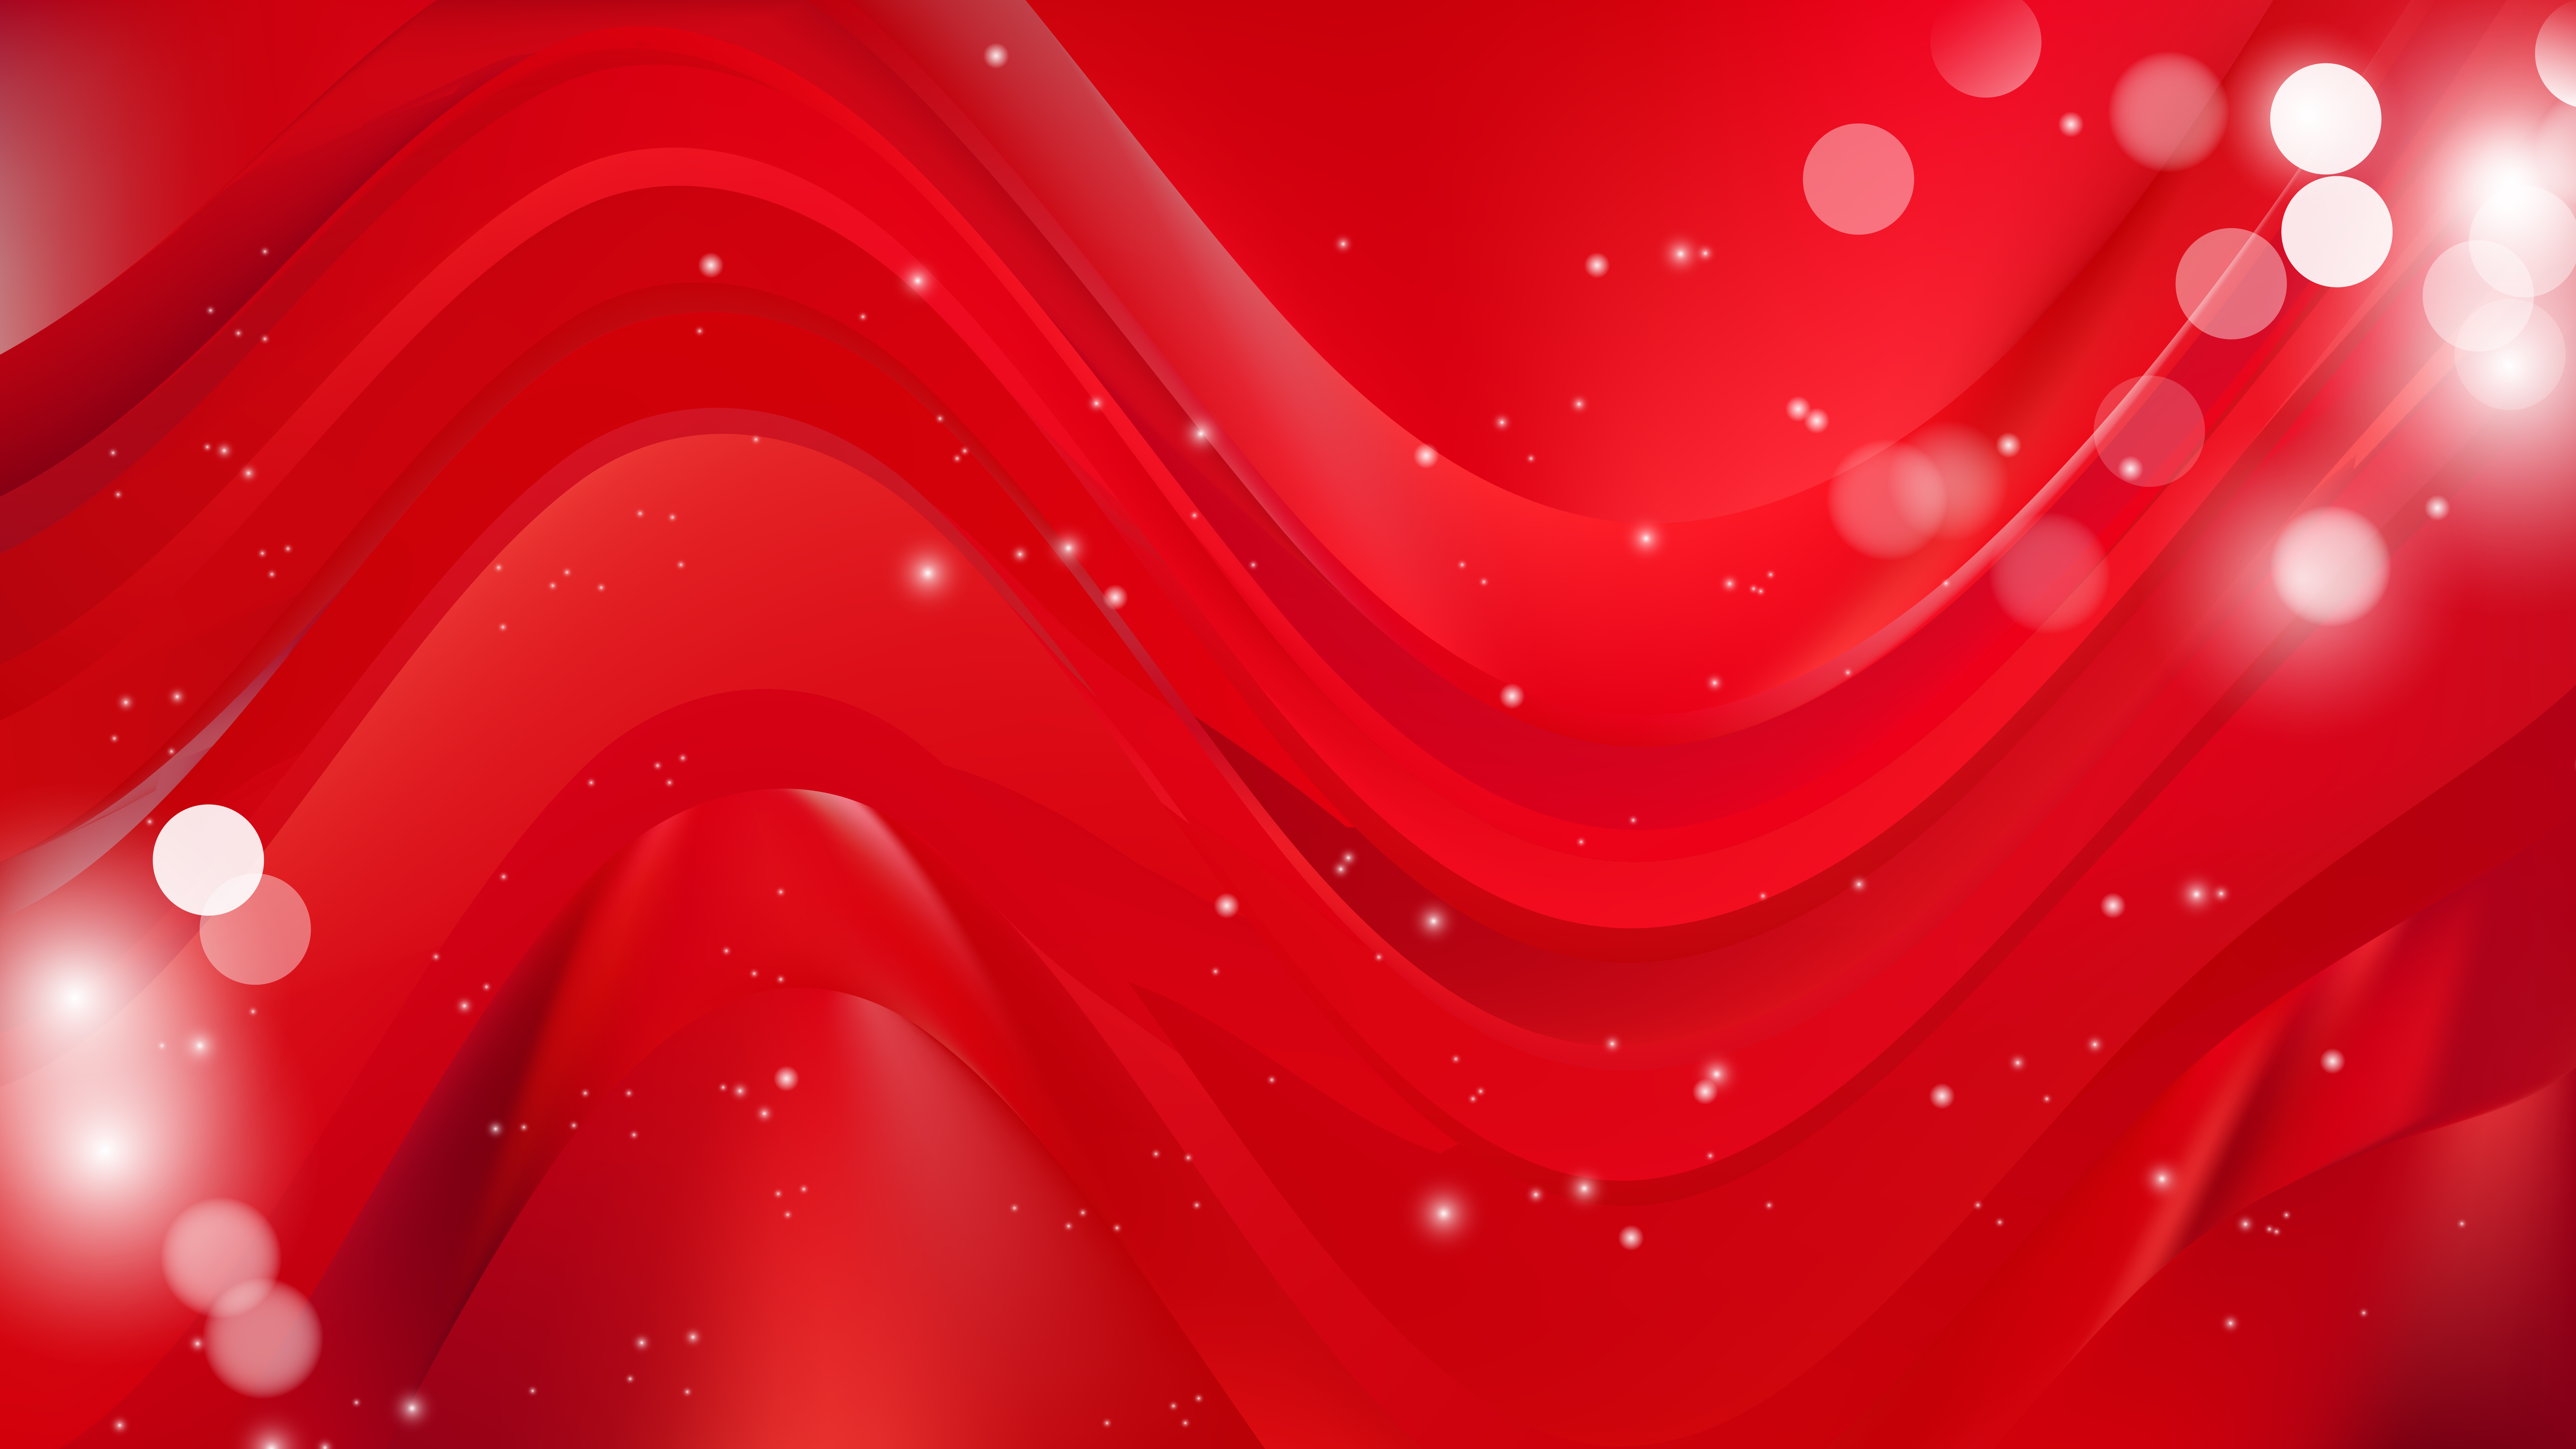 Free Abstract Bright Red Blurred Lights Background Vector